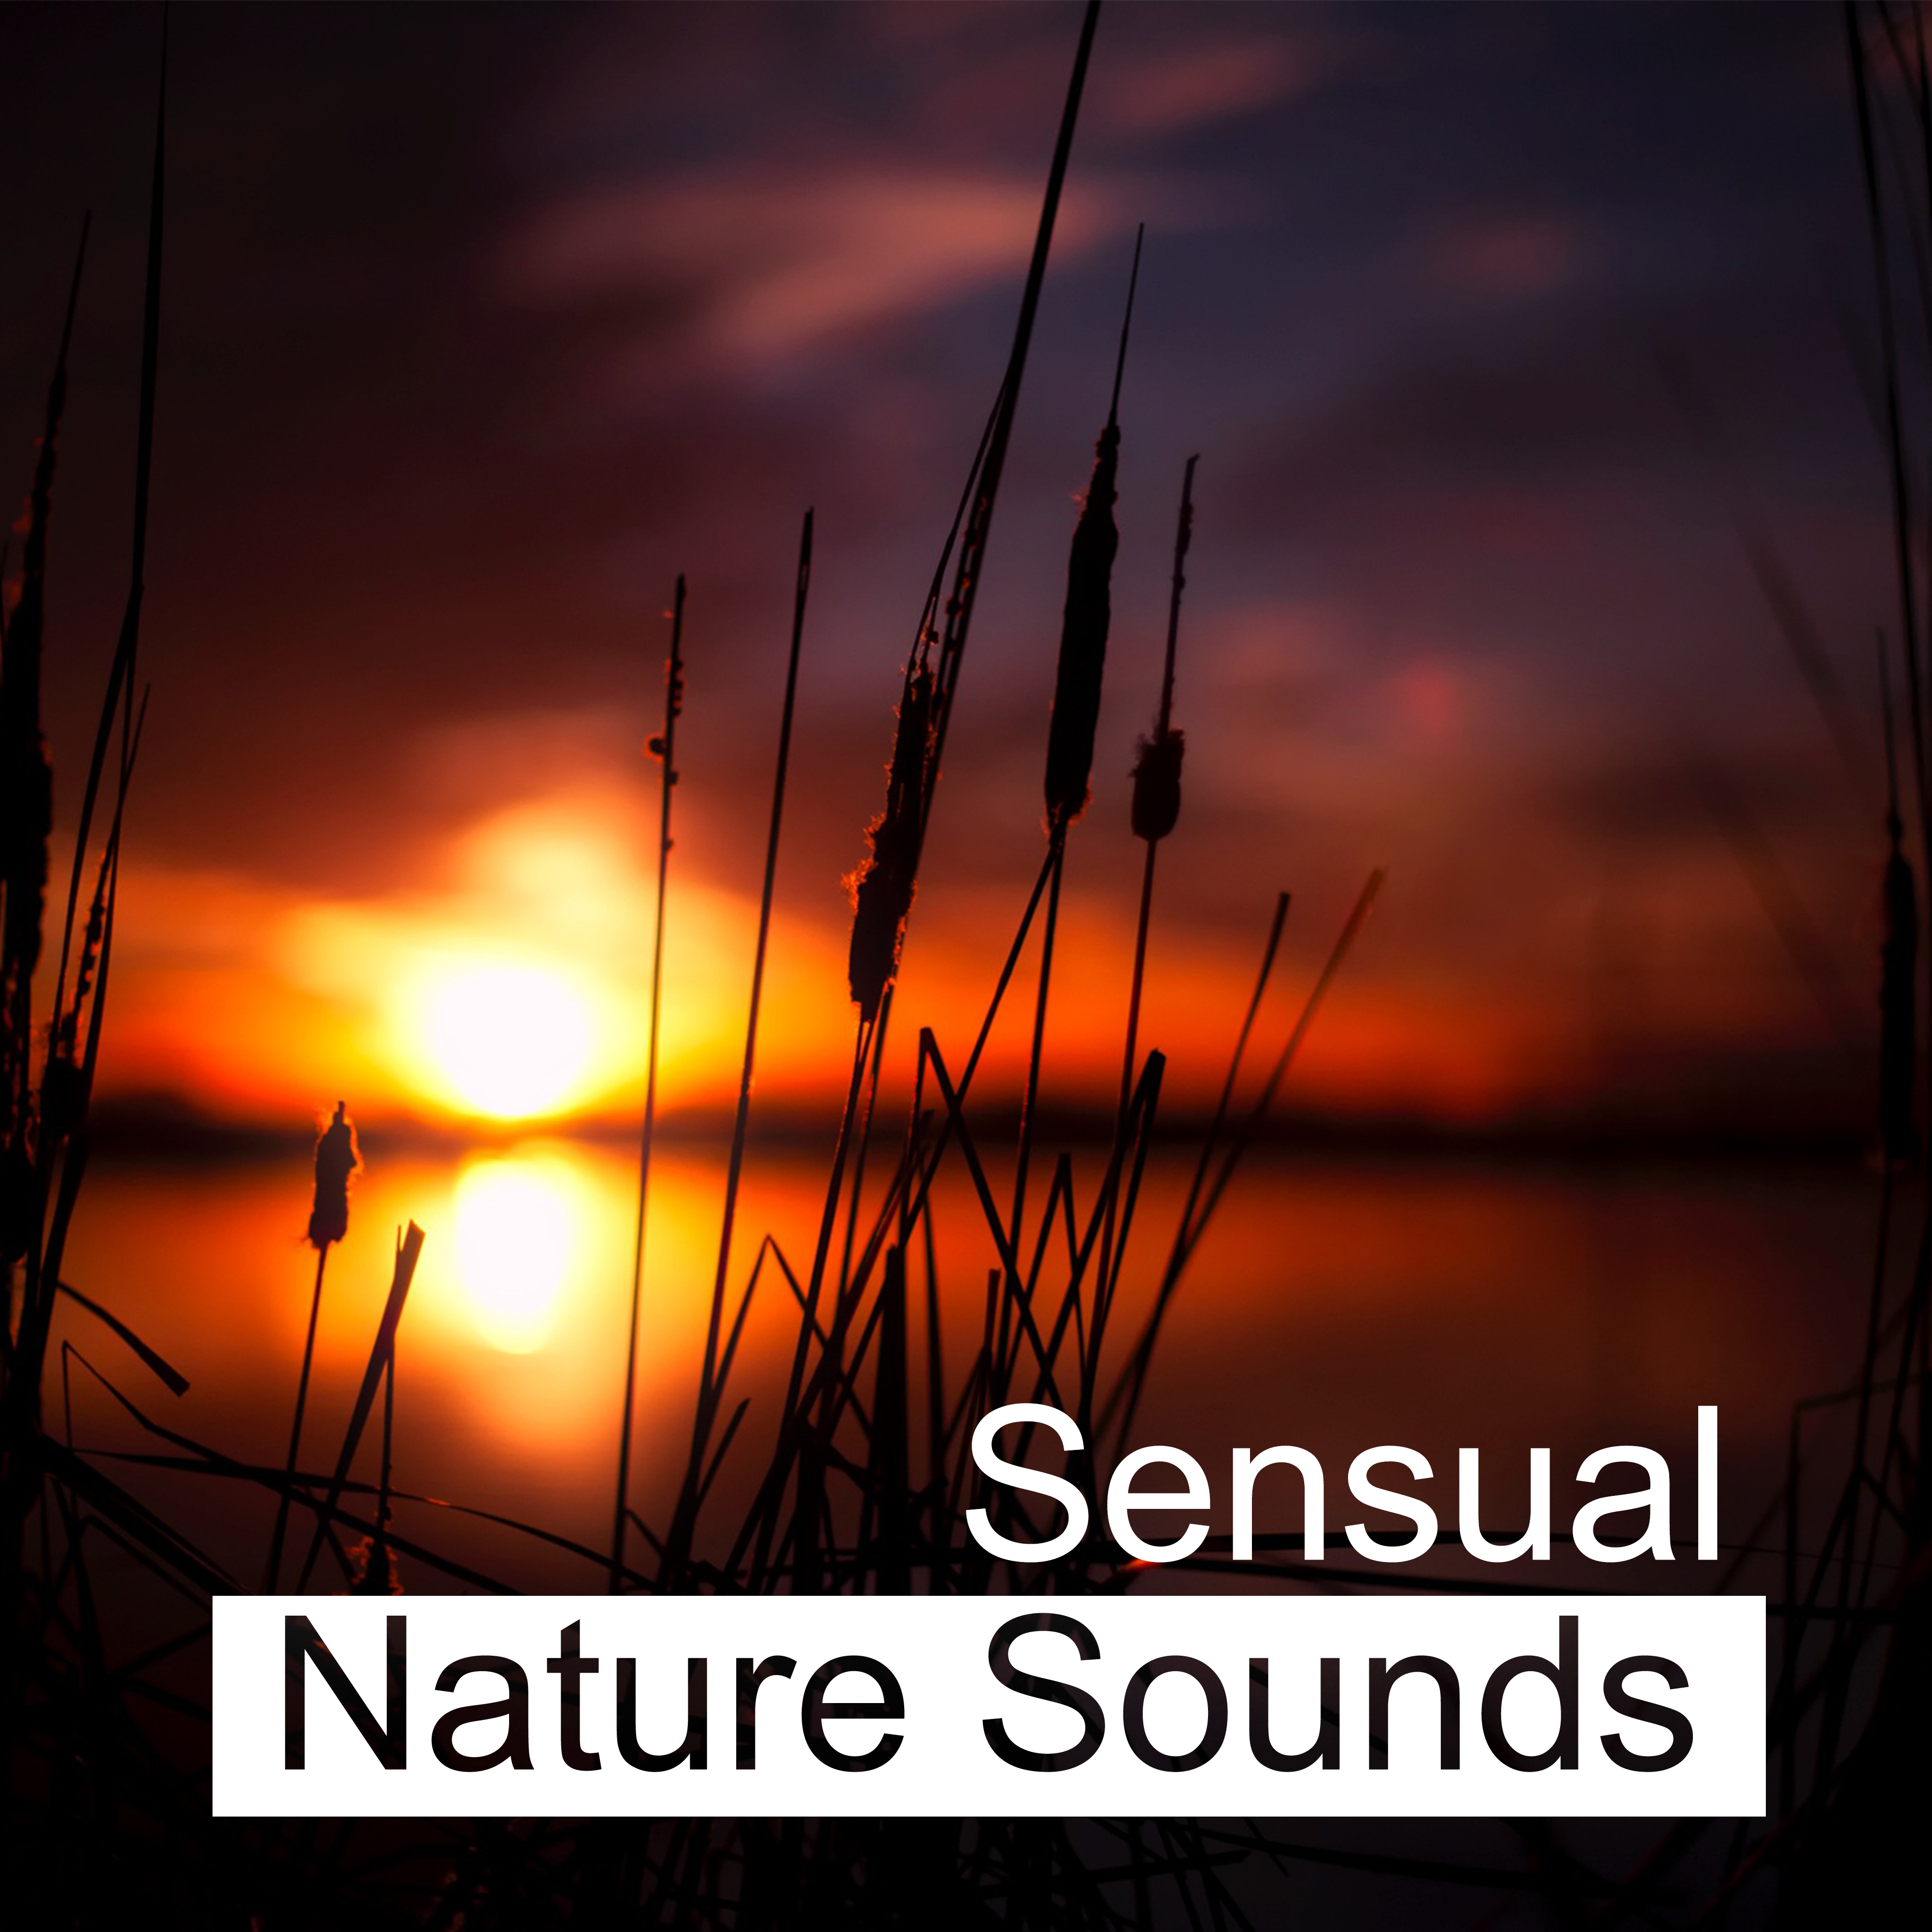 Sensual Nature Sounds  Calming Waves, Harmony Soul, Inner Silence, Peaceful Sounds to Rest, New Age Music